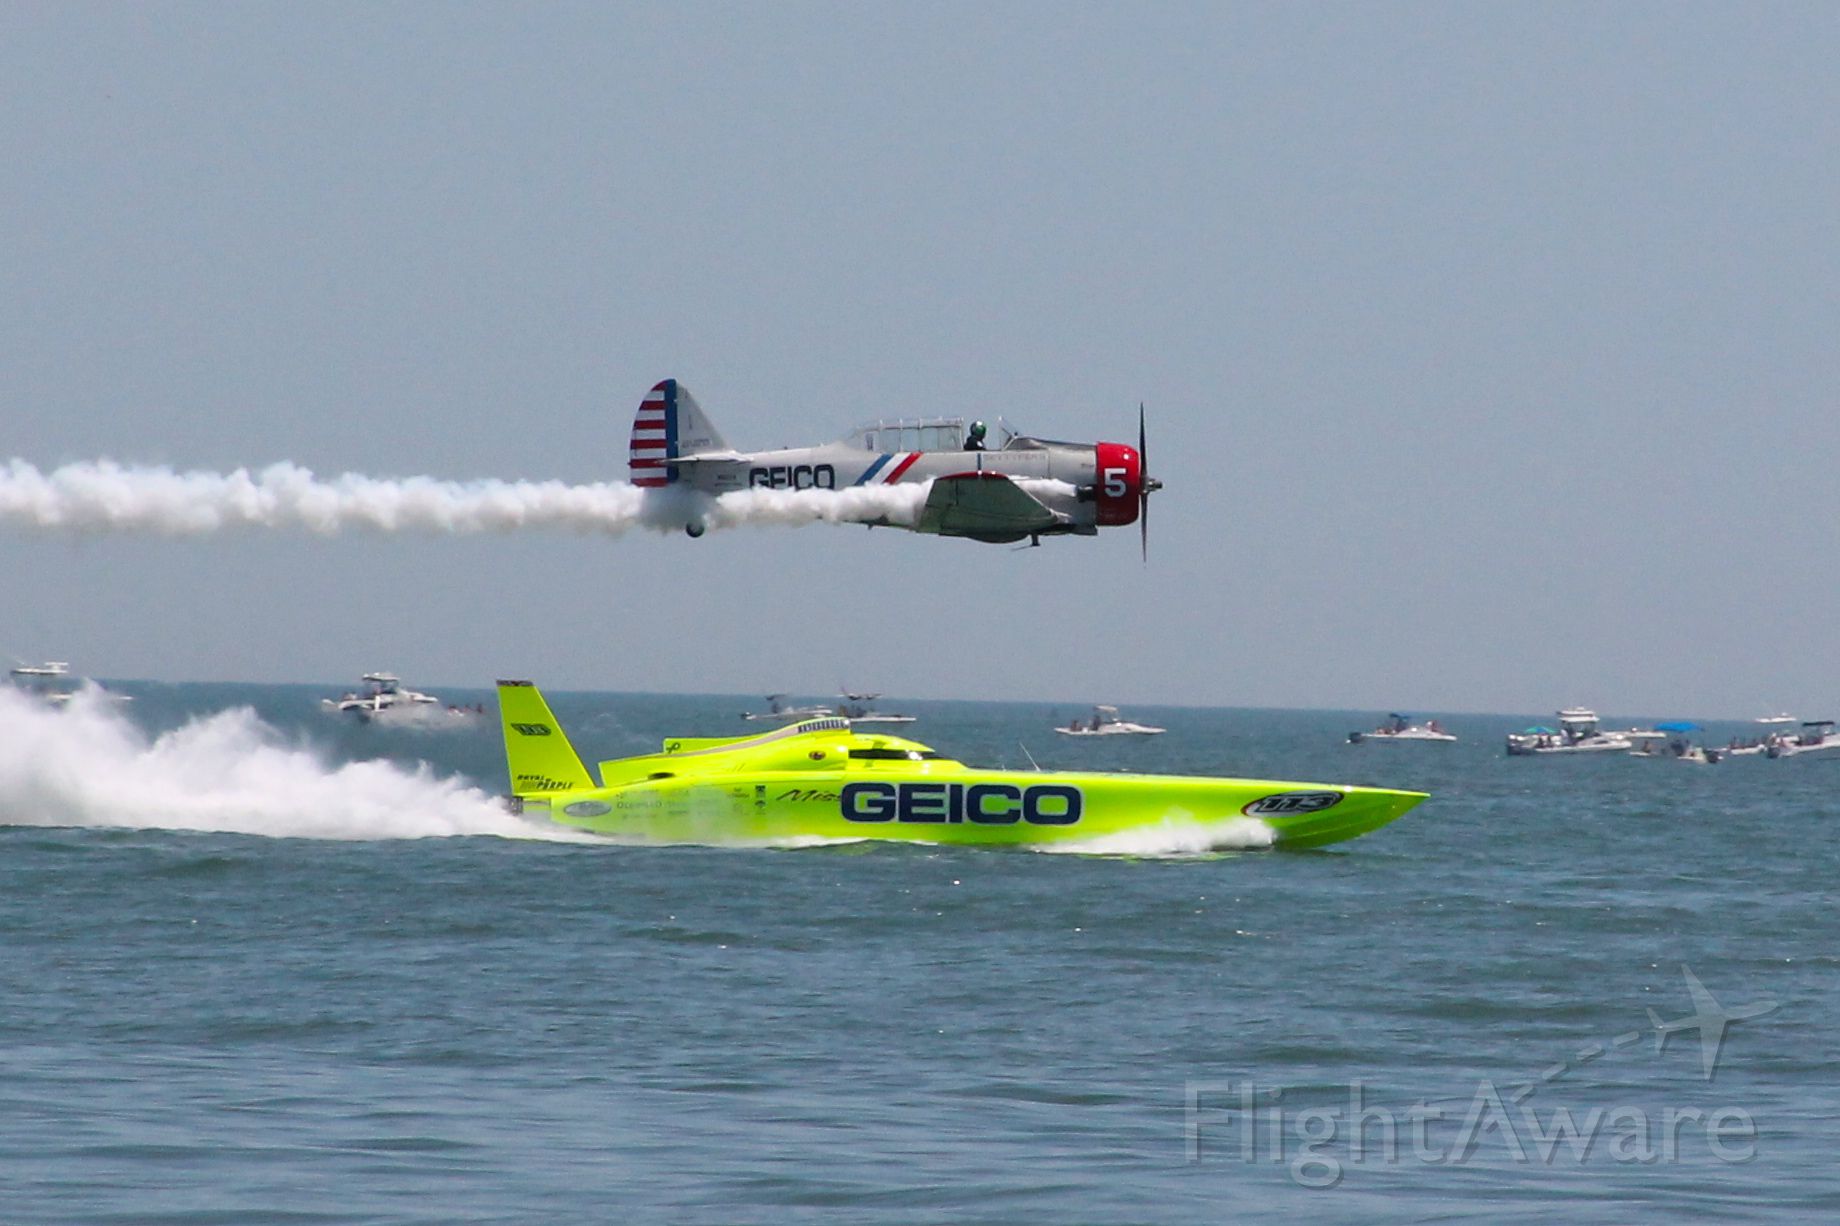 — — - From thel Ocean City Air Show in Ocean City Maryland on June 12, 2012.  This is Geico Skytyper 5 racing Miss Geico Cigar Boat.